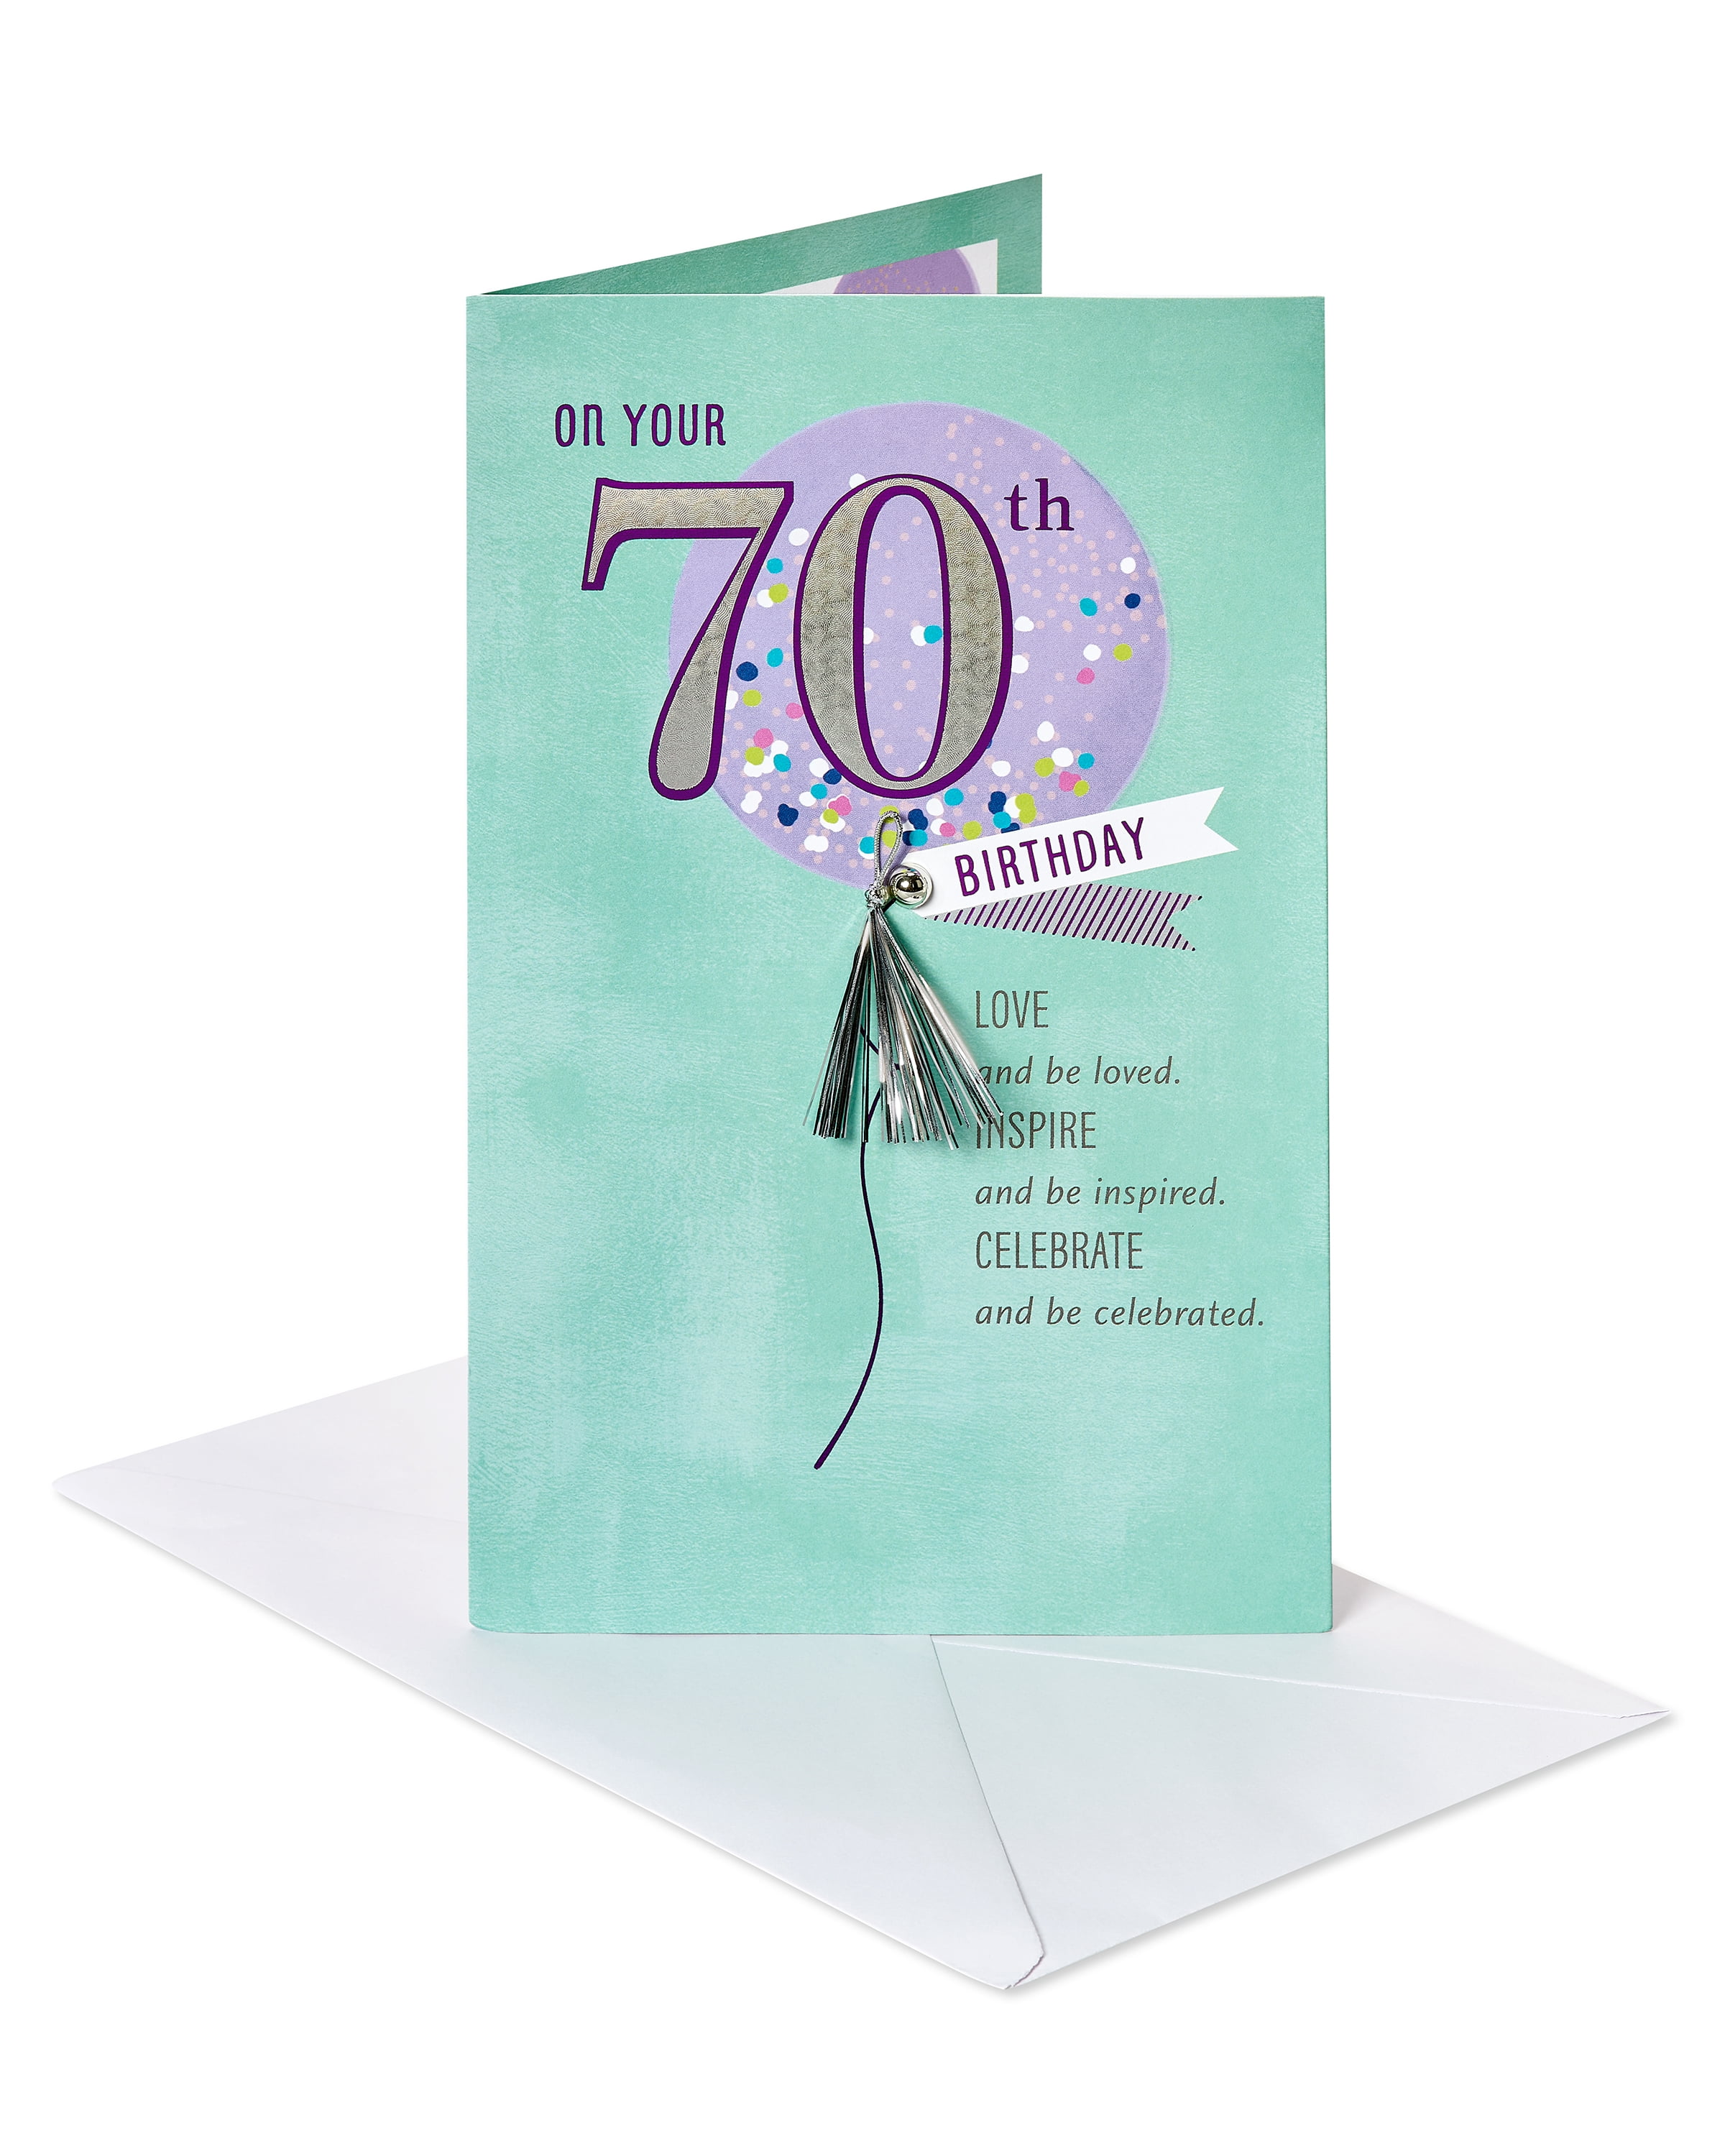 HANDMADE STITCHED  70TH  BIRTHDAY CARD NUMBER  70 WITH FLOWERS